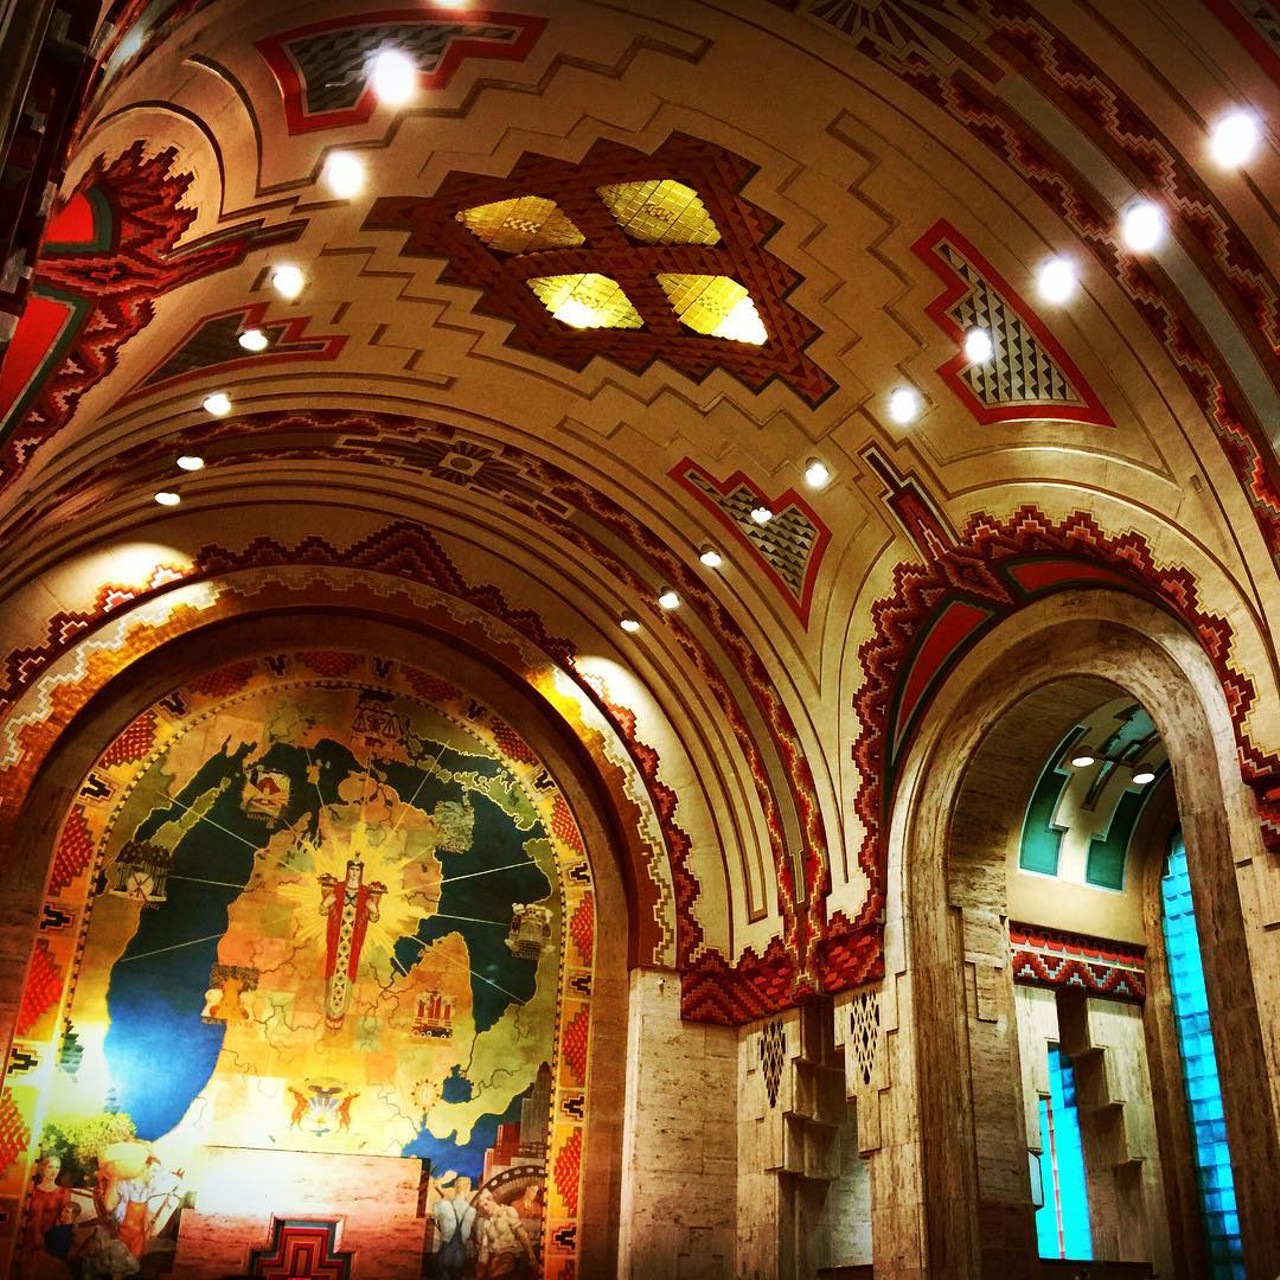 Guardian Building
Tour the gorgeous Guardian Building and have a cup of coffee at 500 Griswold St. You and your special someone love the gorgeous detailing that make up the Art Deco Guardian Building. Why not spend some time inside, snap some photos, and then enjoy a nice latte in the Rowland Cafe in the lobby.
Photo via Instagram user @tomr107